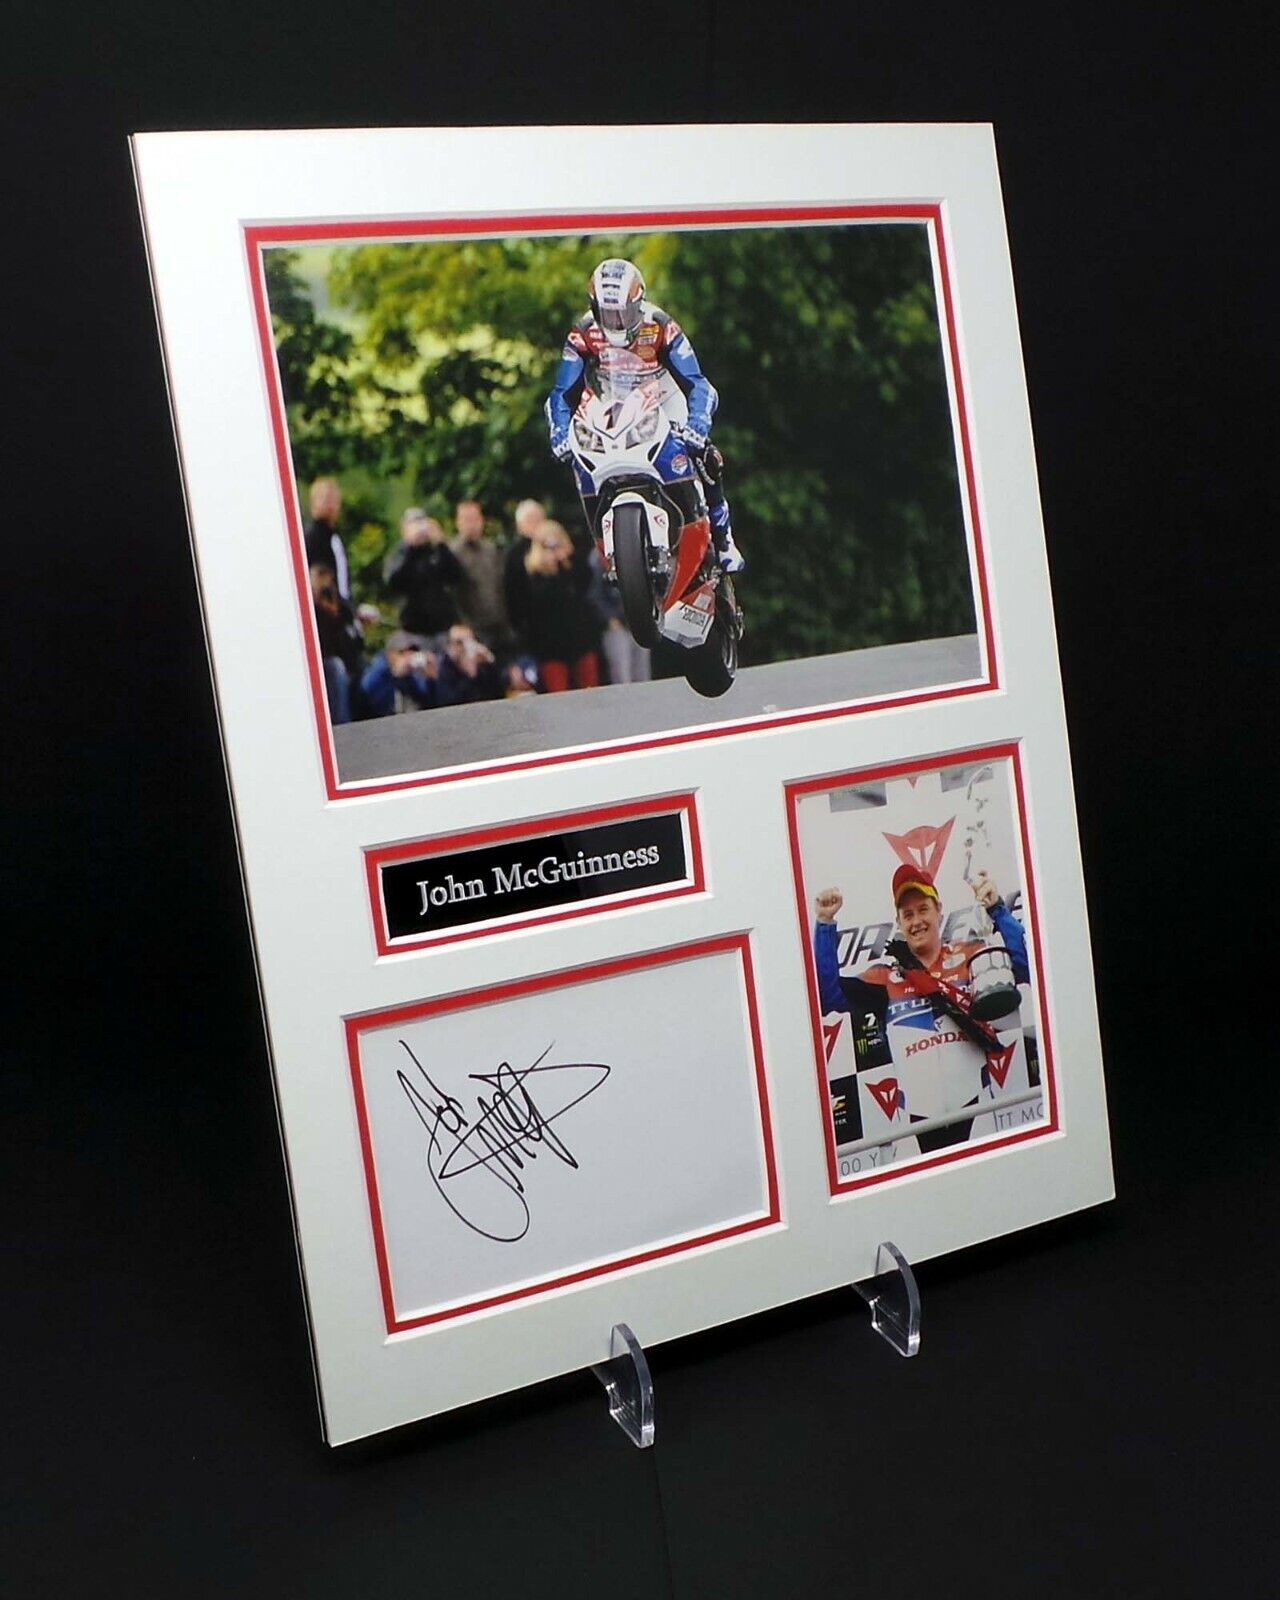 John McGUINNESS Signed Mounted Photo Poster painting Display 2 AFTAL Isle of Man TT Race Legend